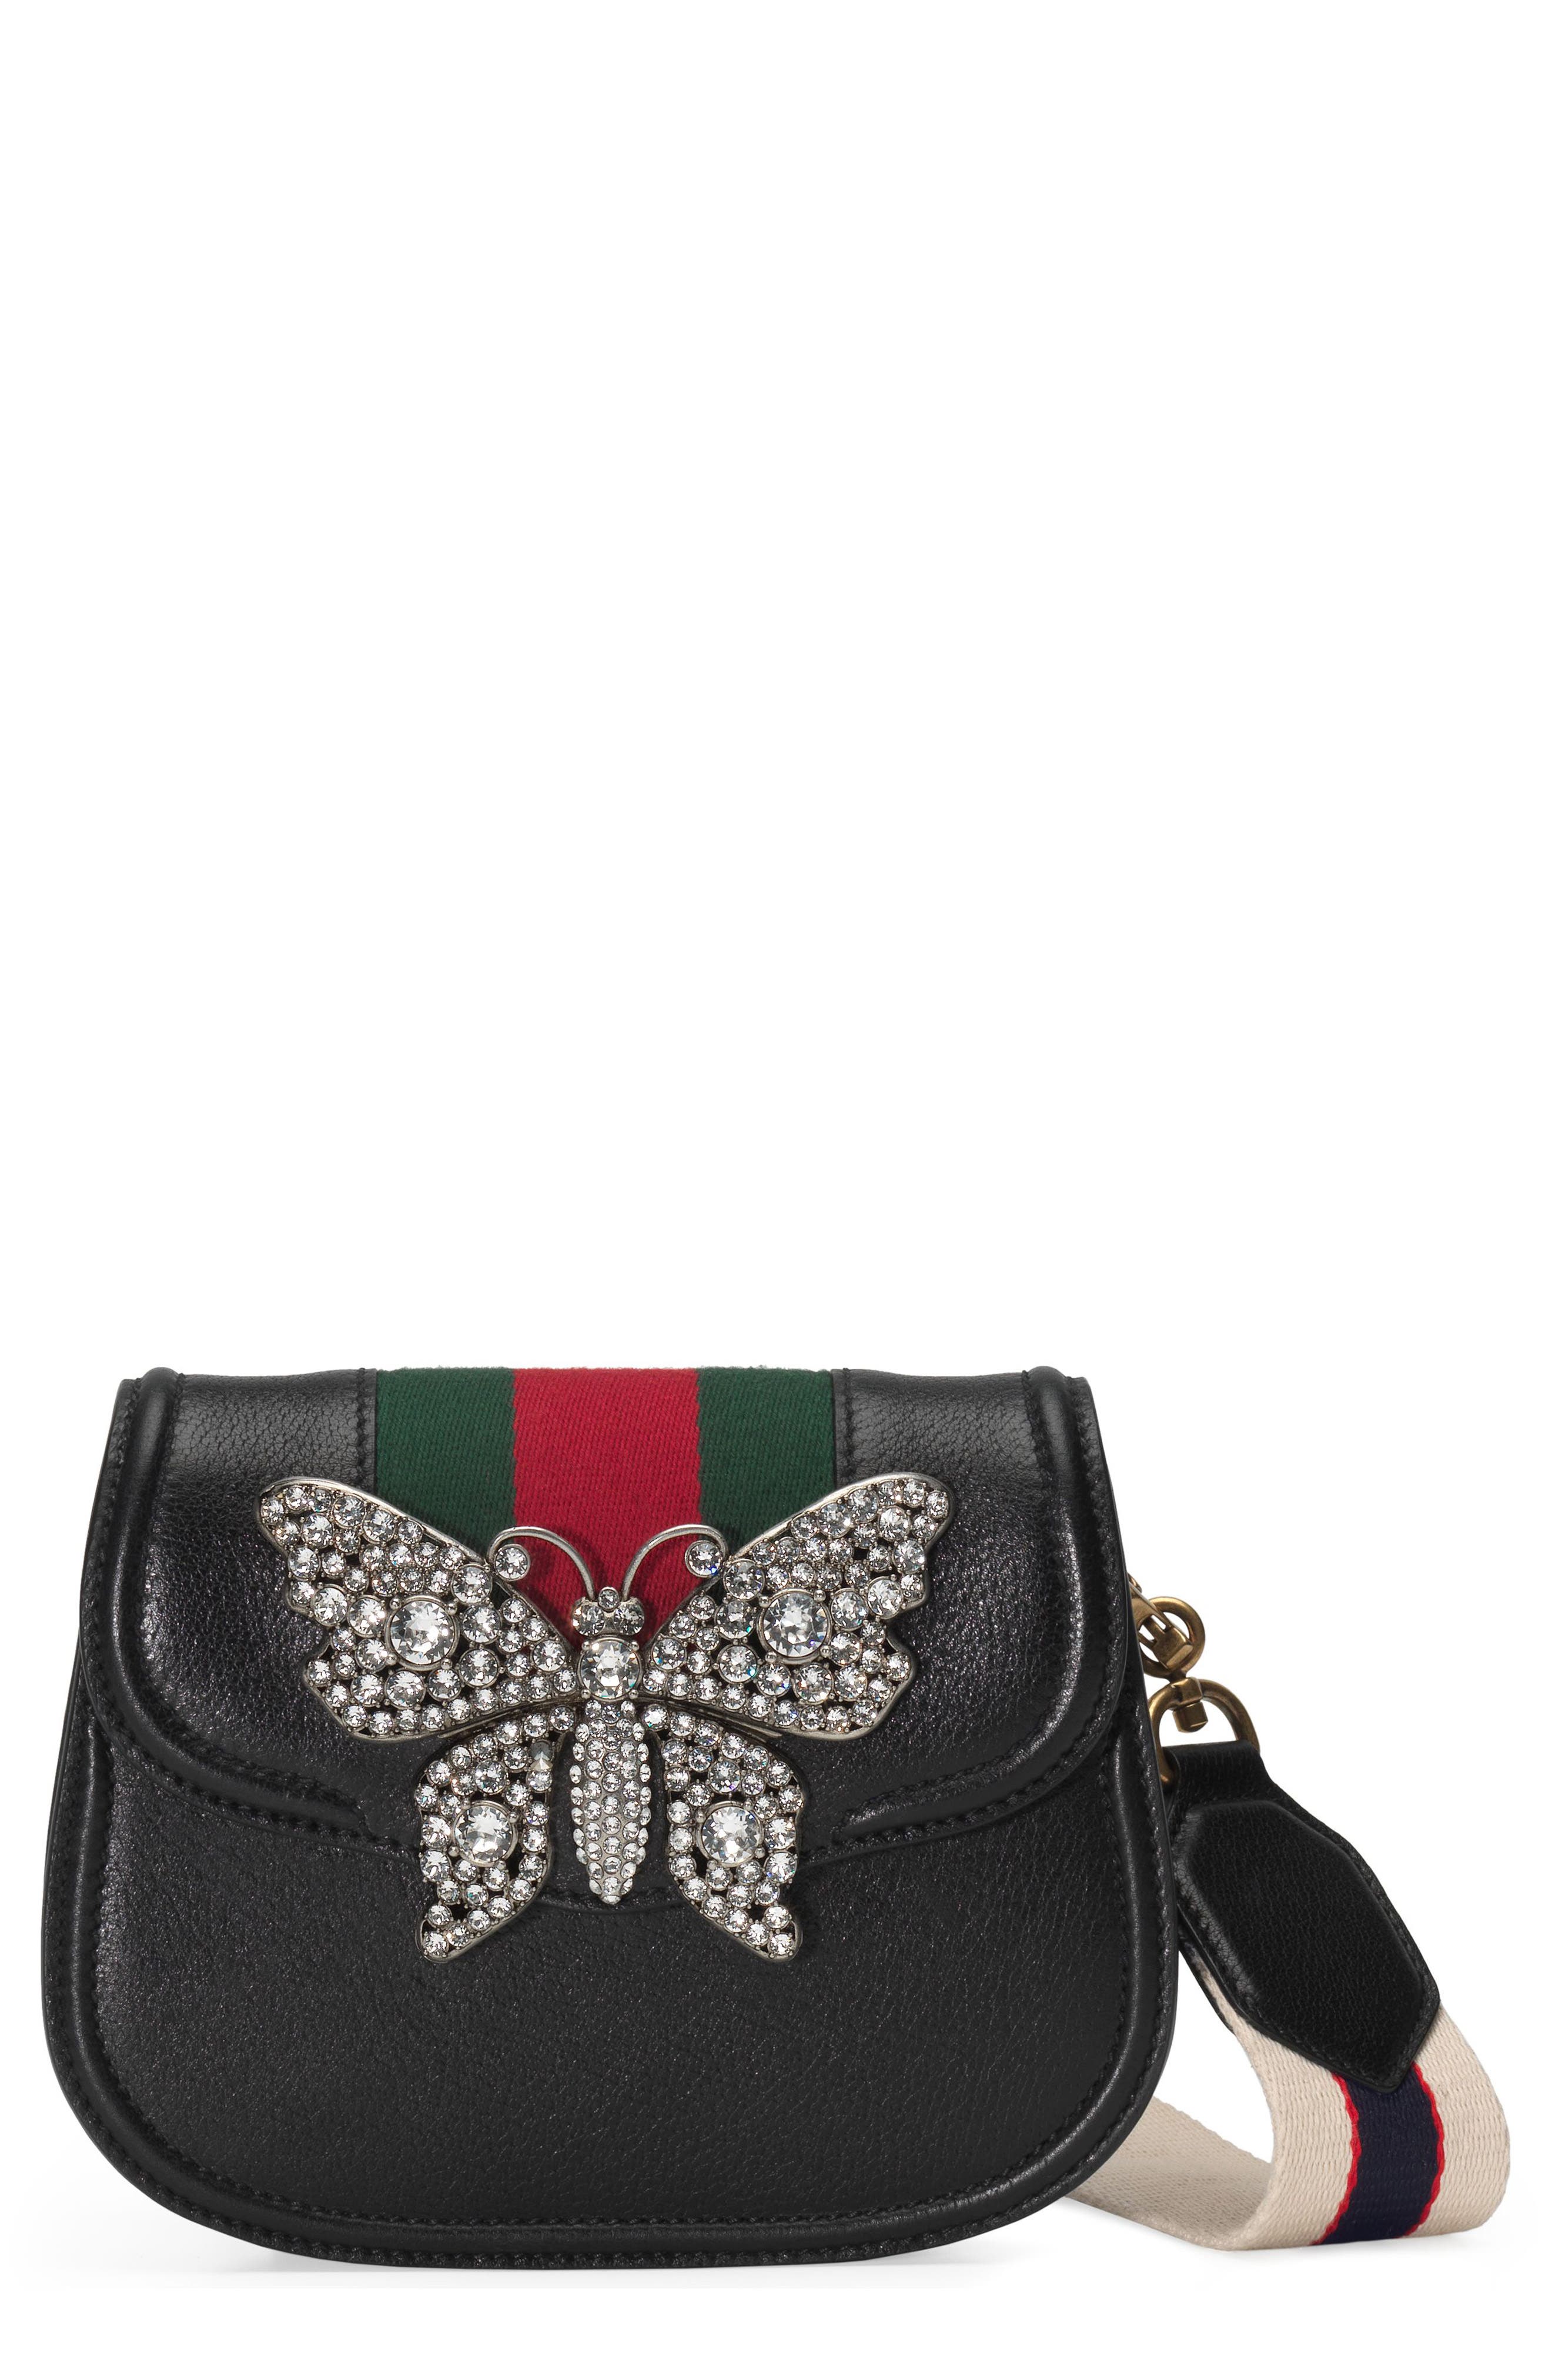 gucci black bag with butterflies